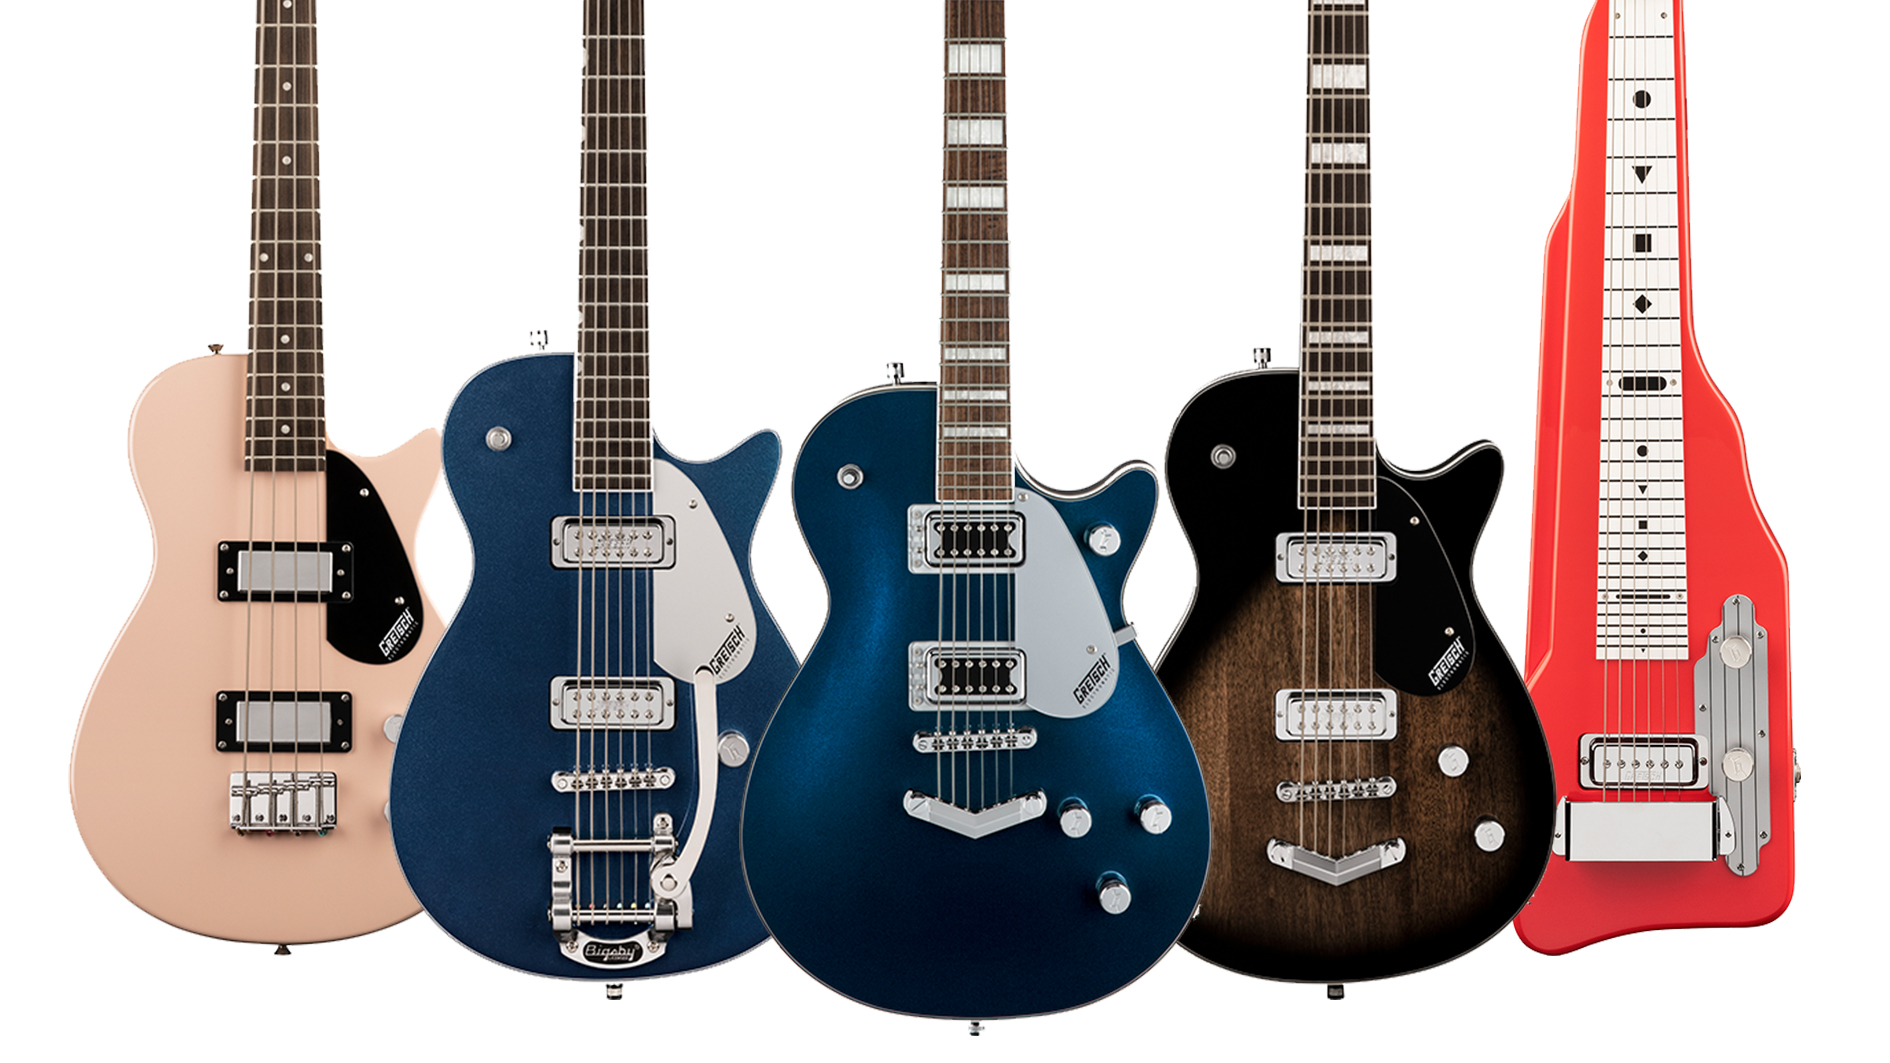 Gretsch refreshes Electromatic Jet lineup and unveils new looks